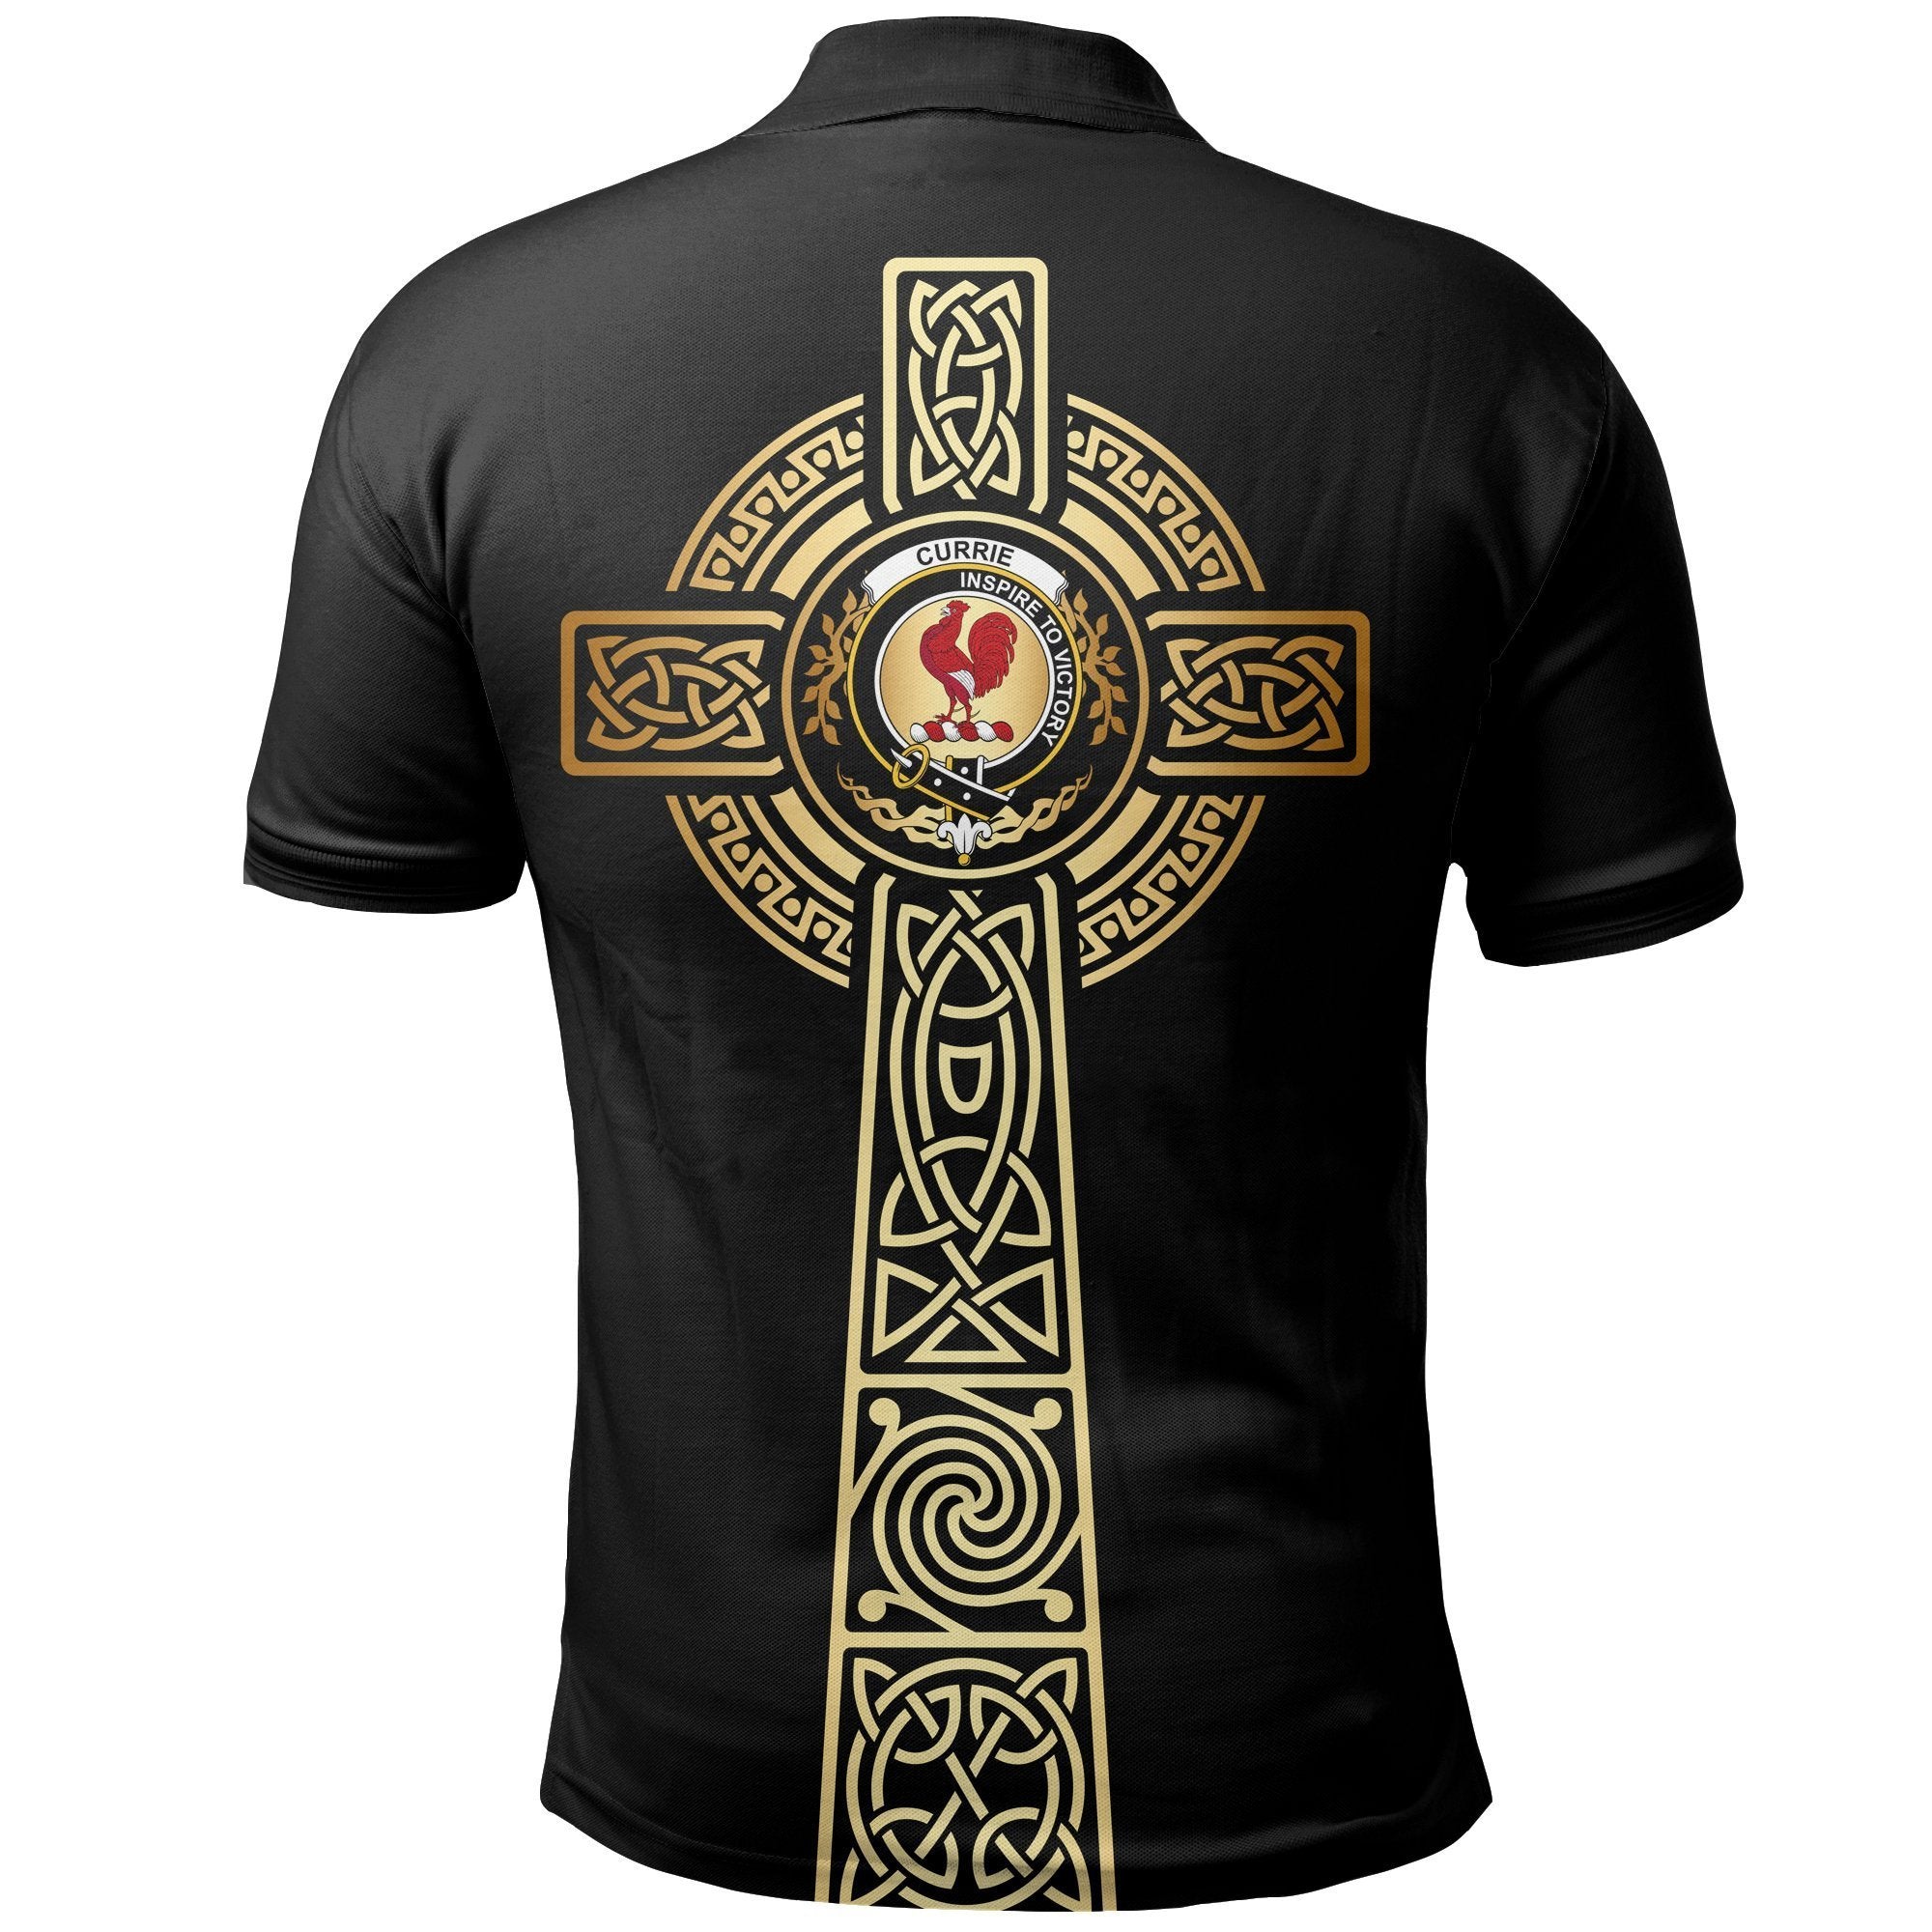 Currie (or Curry) Clan Unisex Polo Shirt - Celtic Tree Of Life